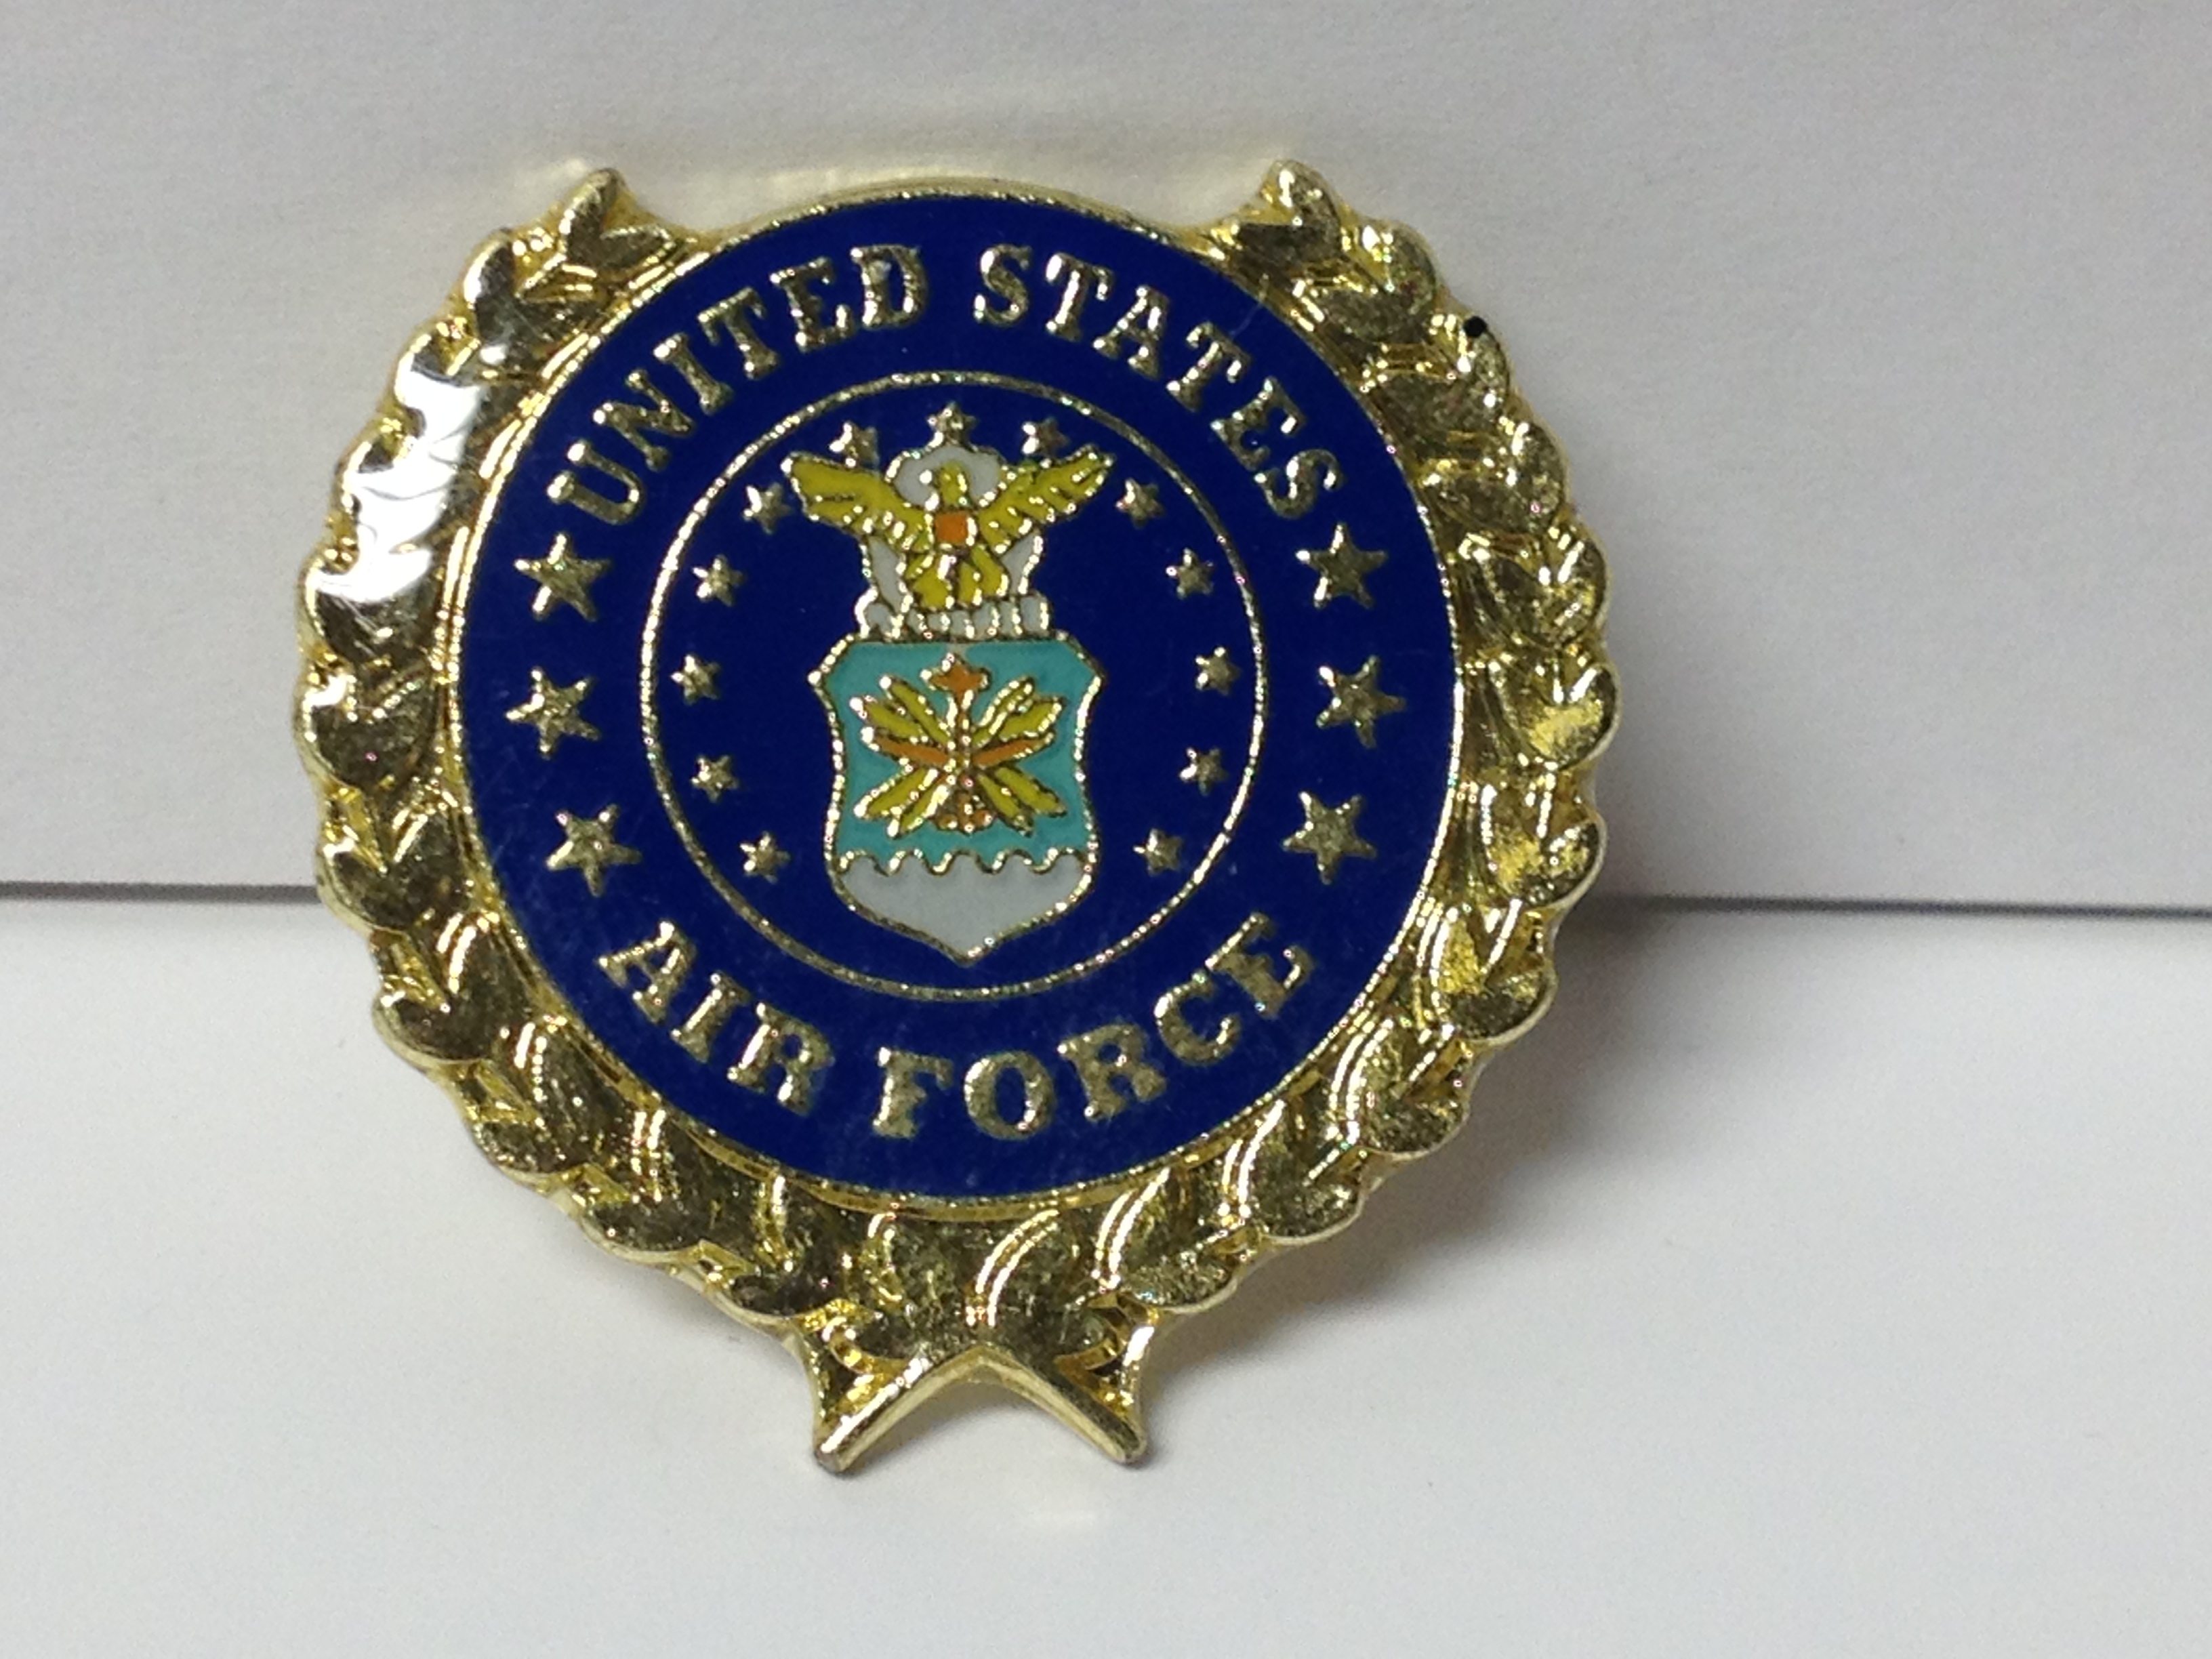 United States Air Force Wreath Lapel Hat Pin New Gettysburg Souvenirs